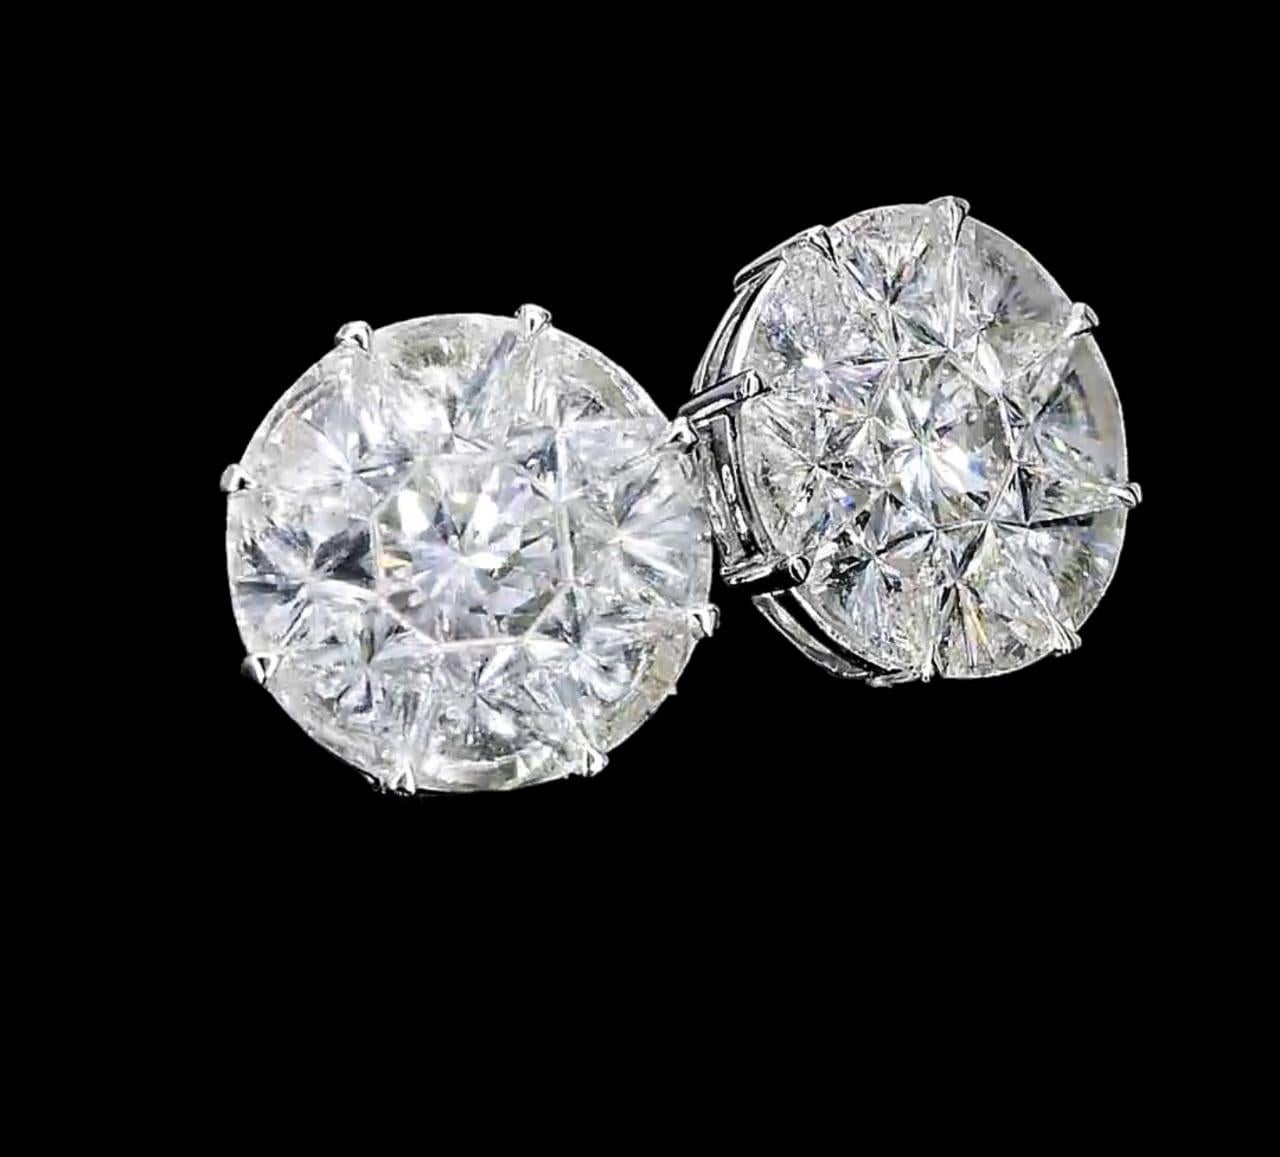 **100% NATURAL FANCY COLOUR DIAMOND JEWELRY**

✪ Jewelry Details ✪

♦ MAIN STONE DETAILS

➛ Stone Shape: round
➛ Stone Weight: 18 pcs – 3.80 cts

♦ GROSS WEIGHT: 4.40 grams

➛ Metal Type: 18k White Gold
➛ Jewelry Type: Diamond earrings, Stud